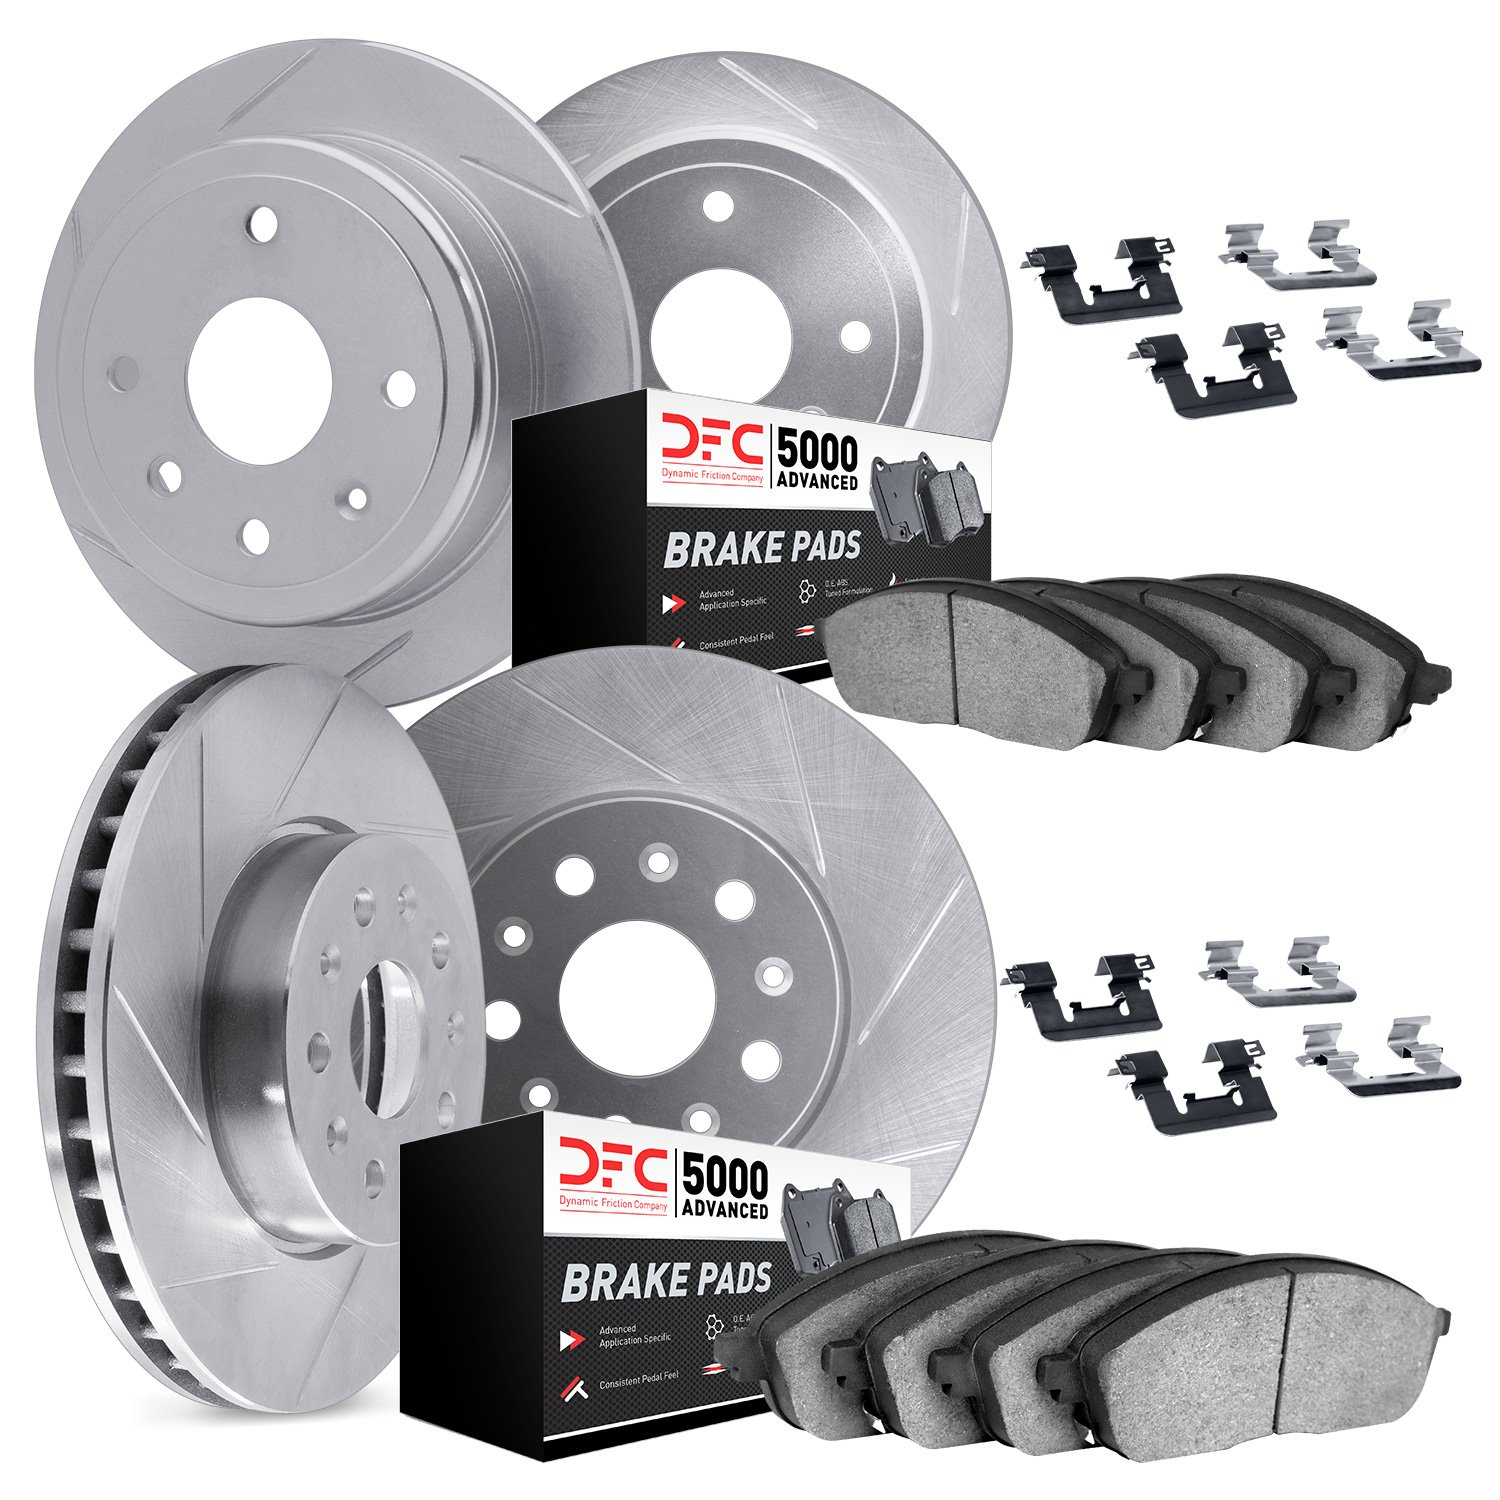 5514-42006 Slotted Brake Rotors w/5000 Advanced Brake Pads Kit & Hardware [Silver], 1999-2004 Mopar, Position: Front and Rear